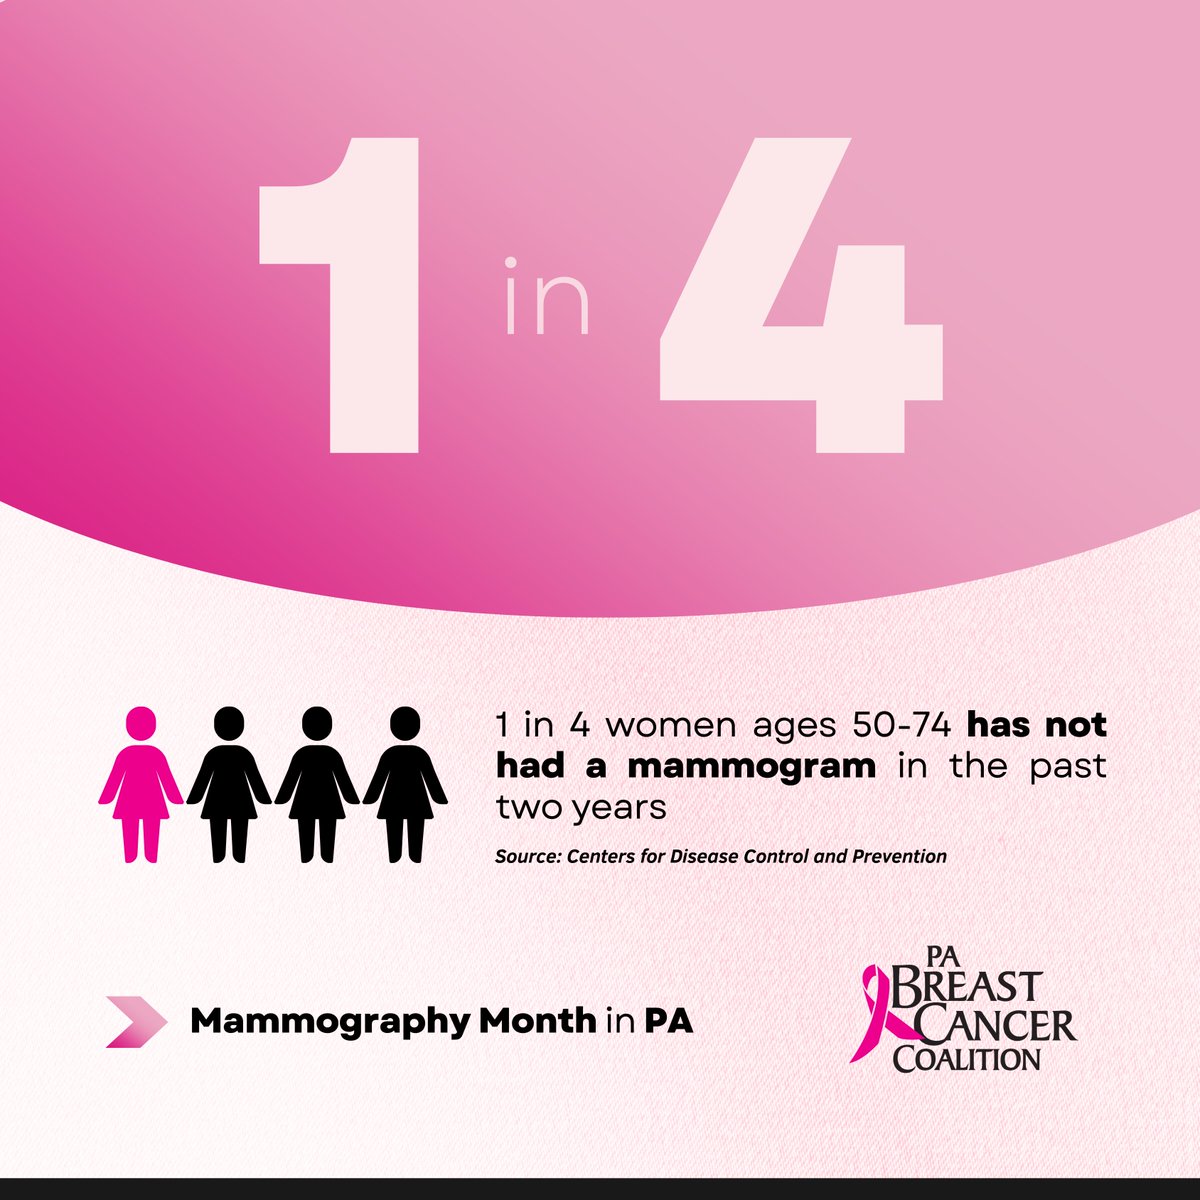 Don't be the 1! Schedule your mammogram today 📅 If you are uninsured or have a high-deductible plan, you may qualify for a free 3D mammogram and follow-up testing through the @PAHealthDept 💻pbcc.me/mammograms 📲800-377-8828 #MammoMay #EarlyDetectionSavesLives